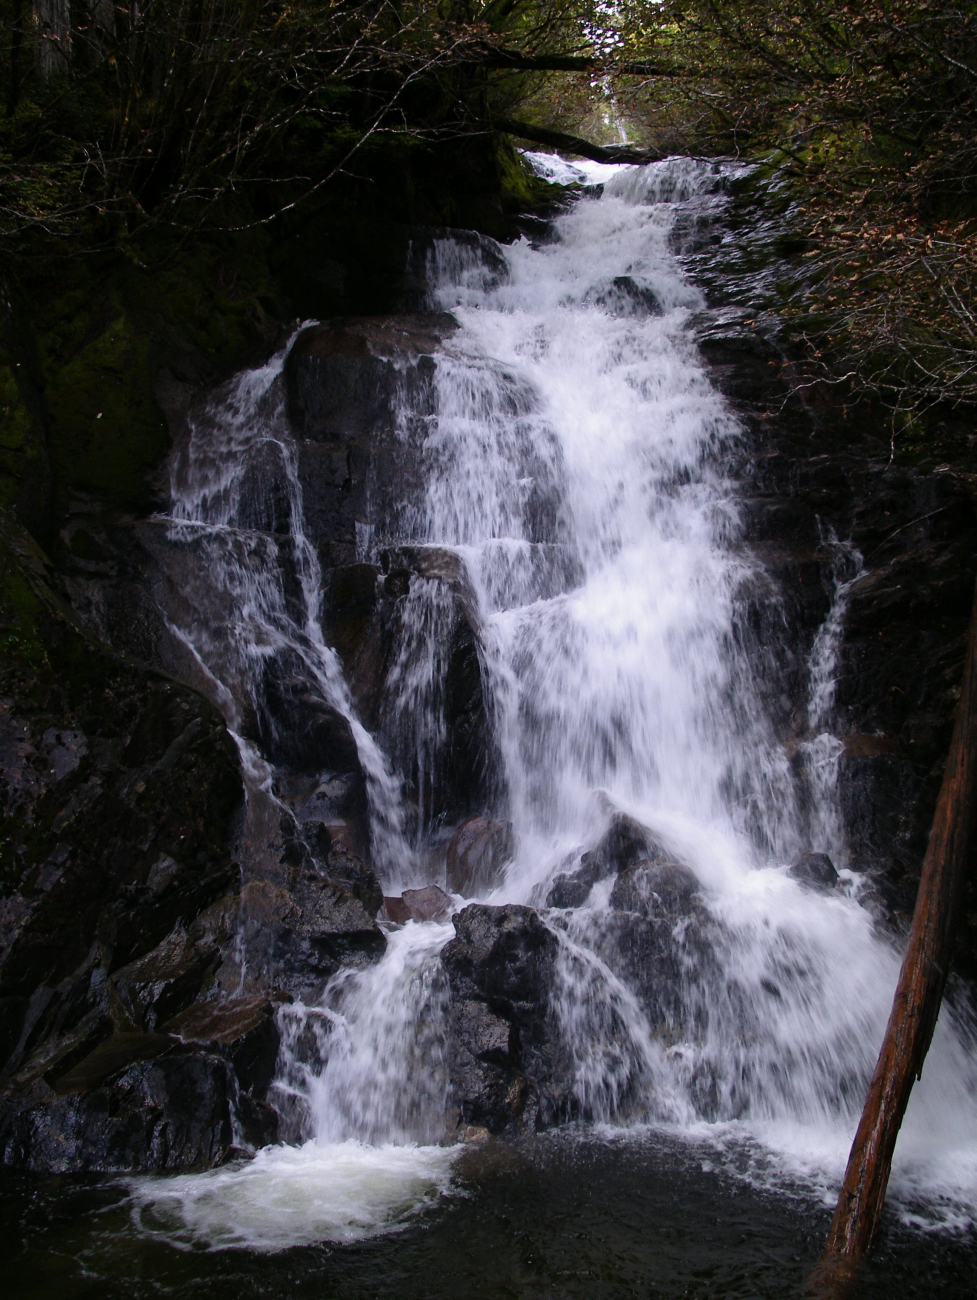 A pretty little waterfall in the Ketchikan area